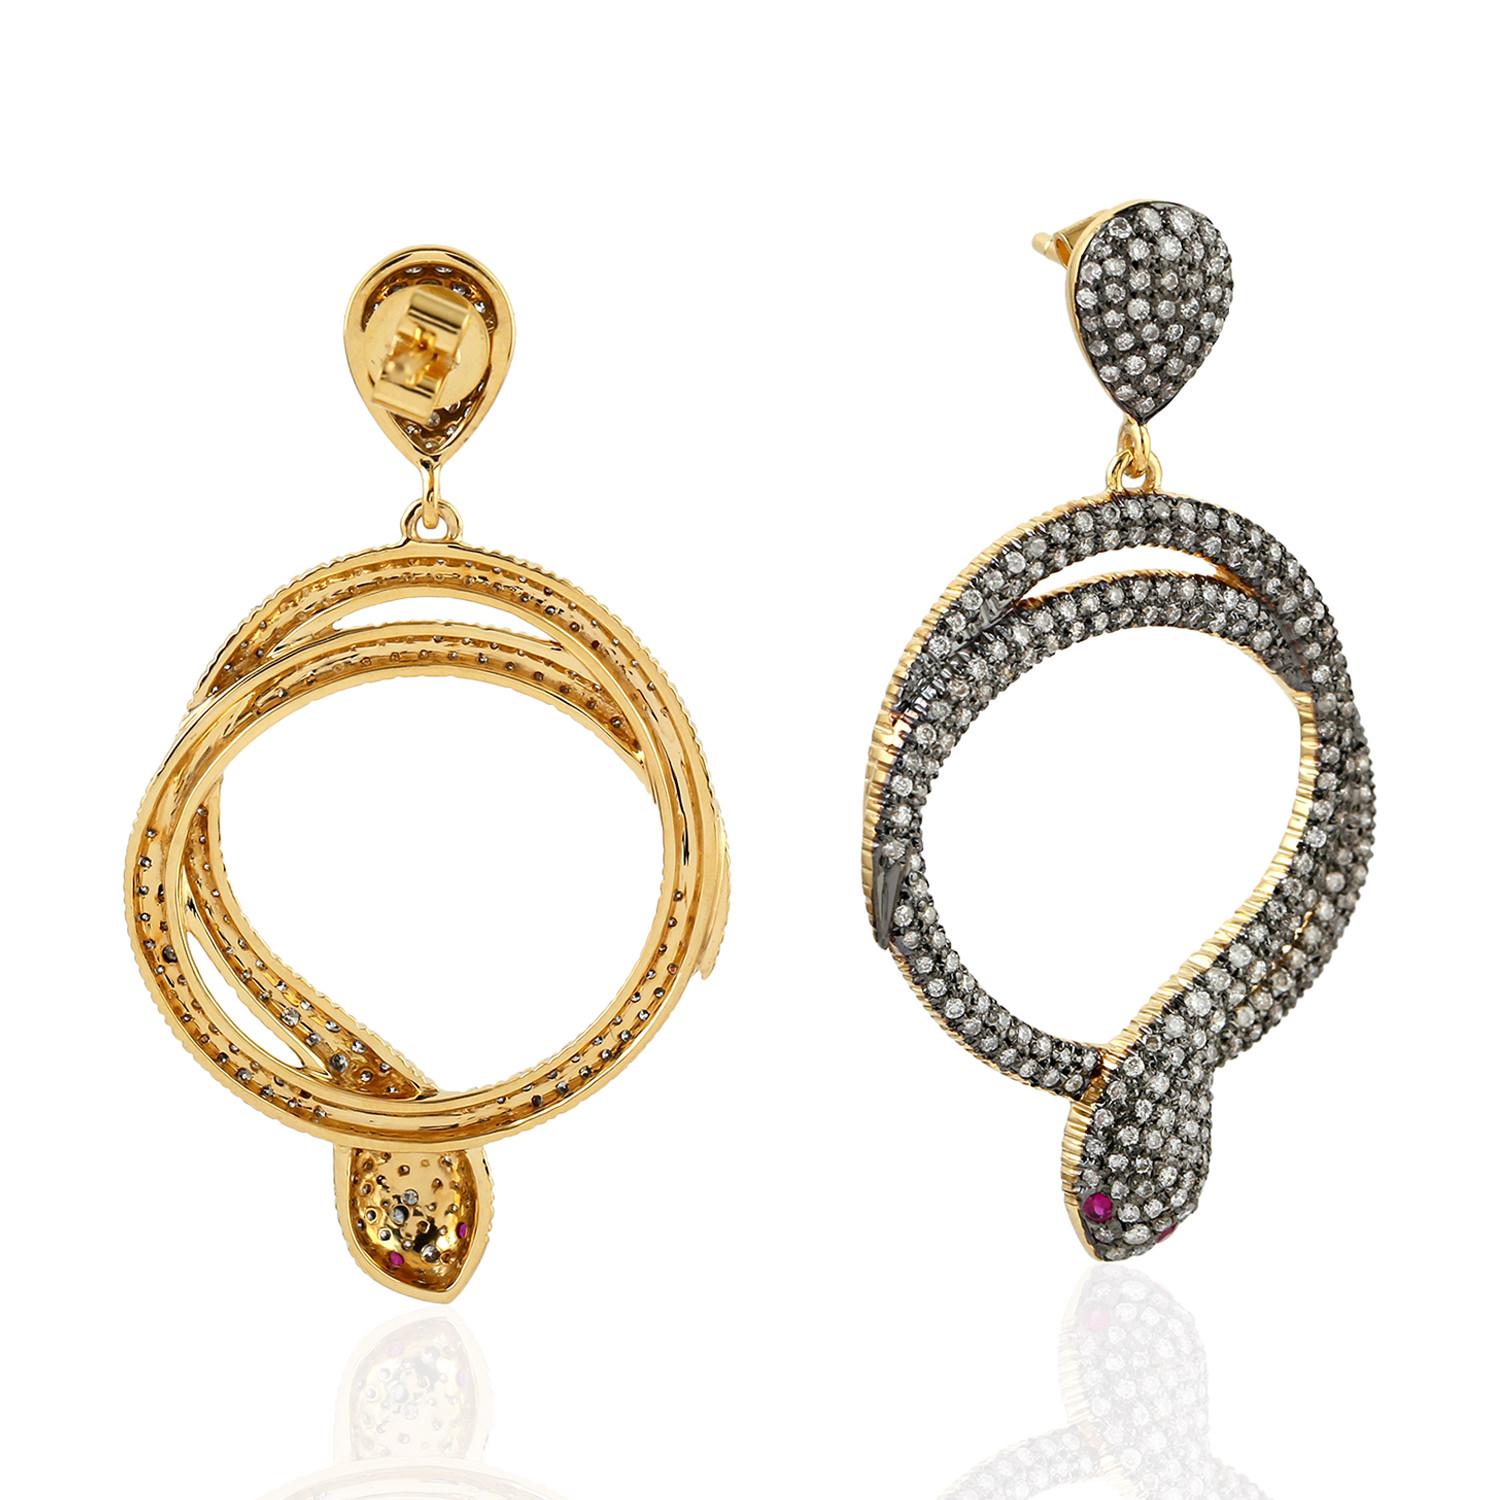 Contemporary Pave Diamond Snake Earrings With Ruby Eyes Made In 18k White Gold For Sale